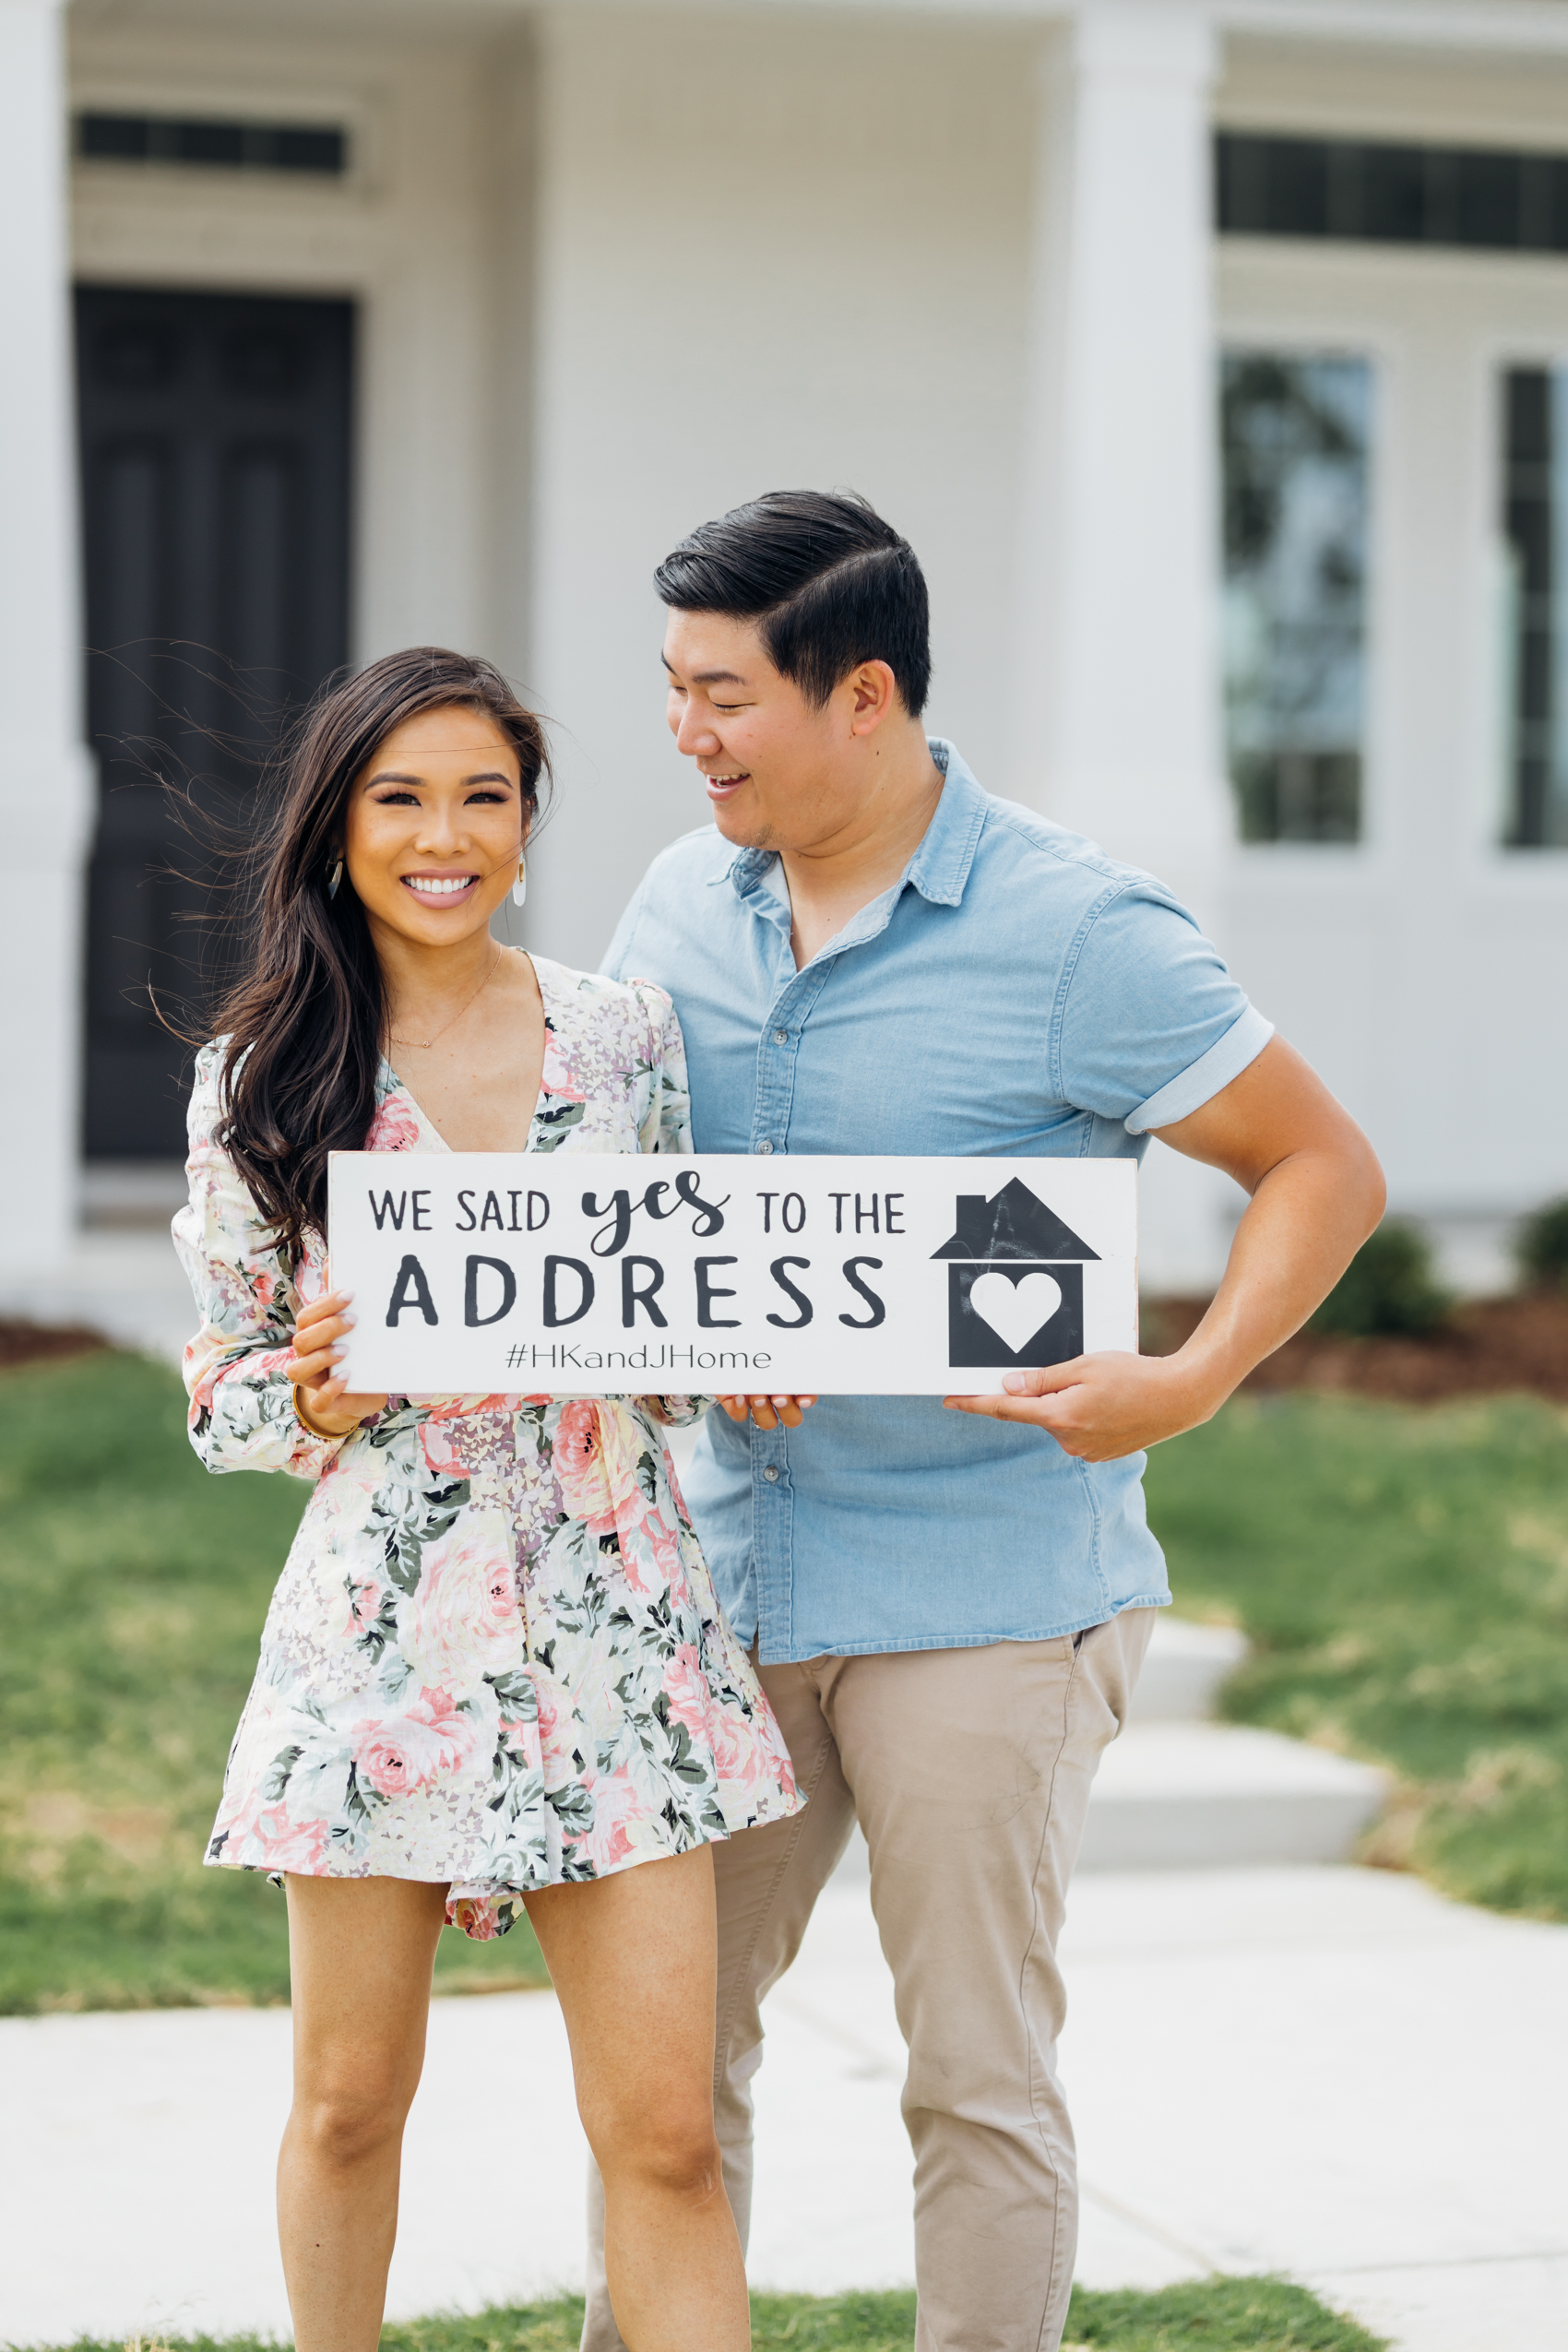 Blogger Hoang-Kim and her fiance Jonathan on the day they closed on their first new home build